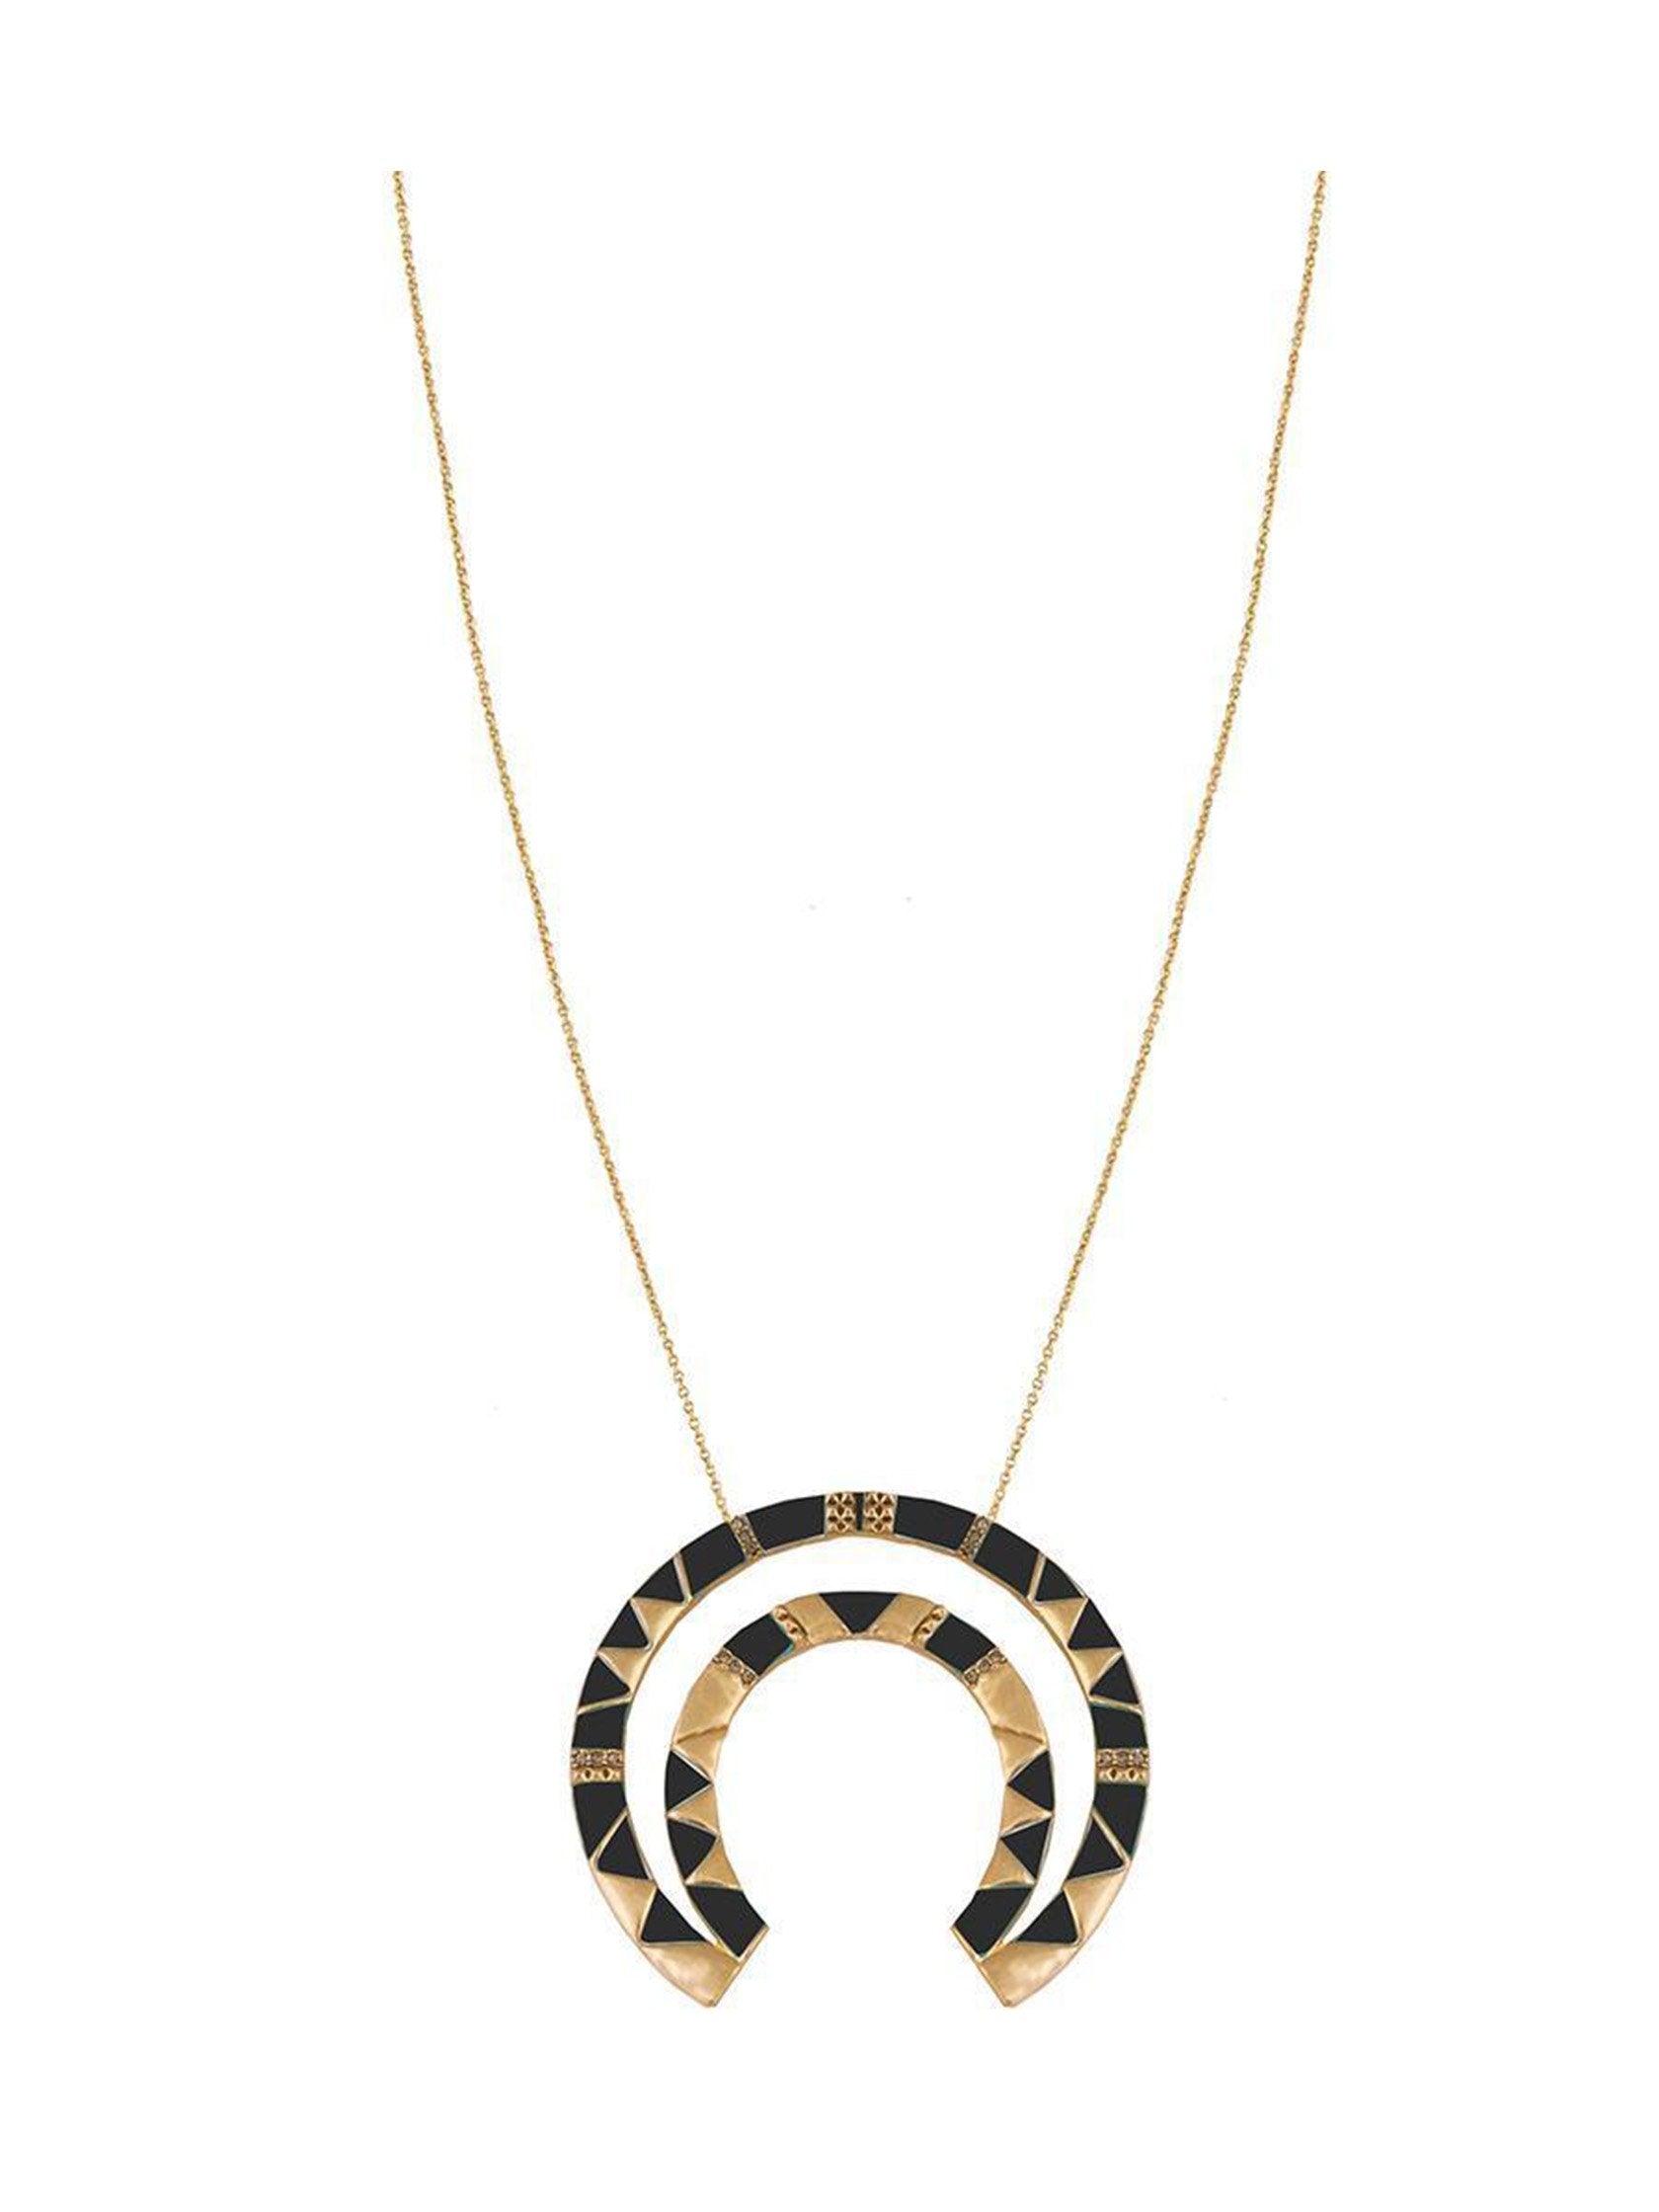 Girl wearing a necklace rental from House of Harlow 1960 called House Of Harlow Curve Aztec Pendant Necklace